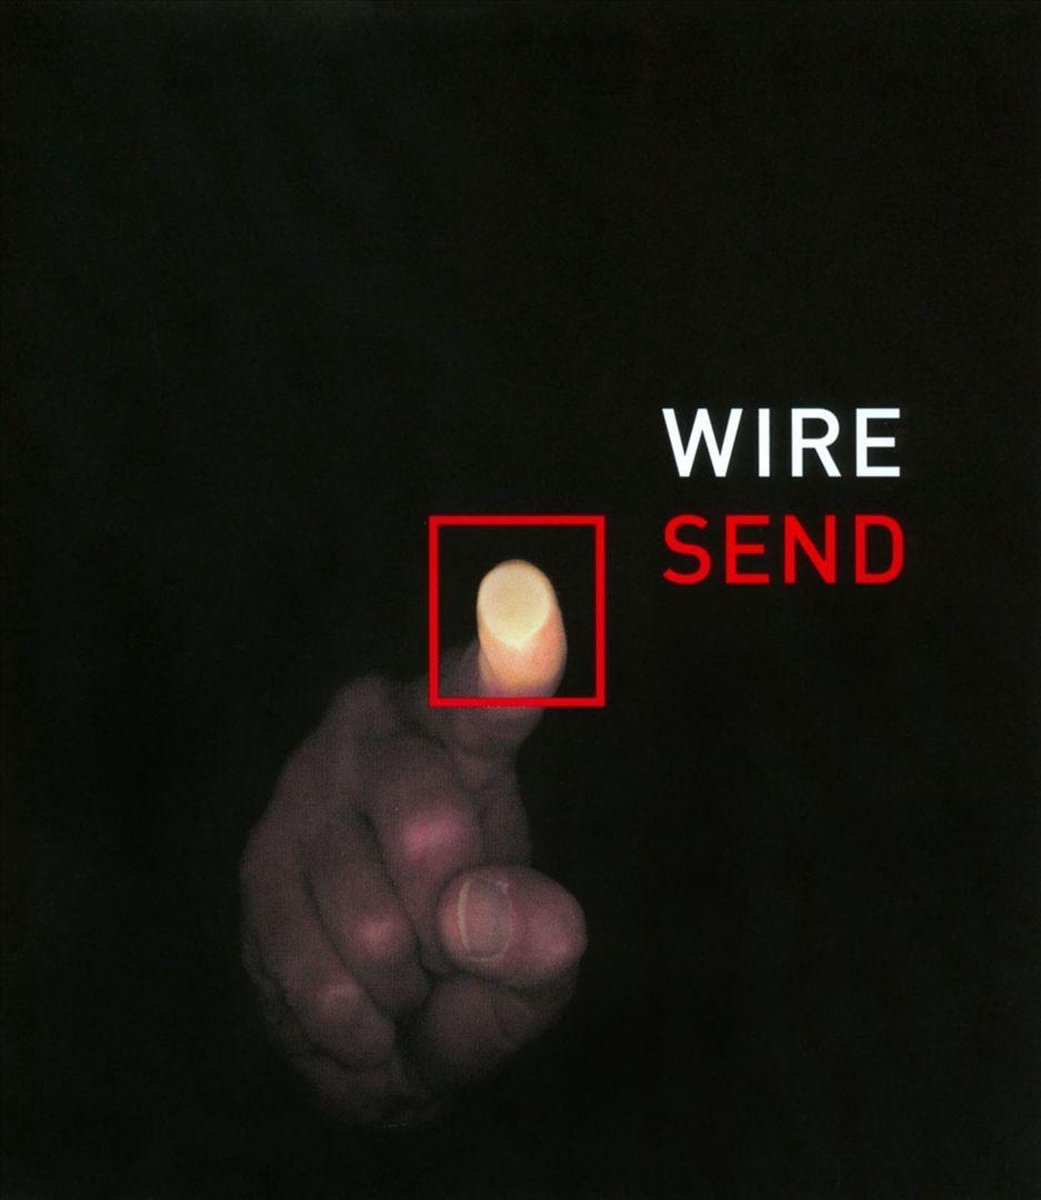 NEWS On this day, 20 ago, Wire returned after a hiatus of a decade with their 10th studio album, Send!